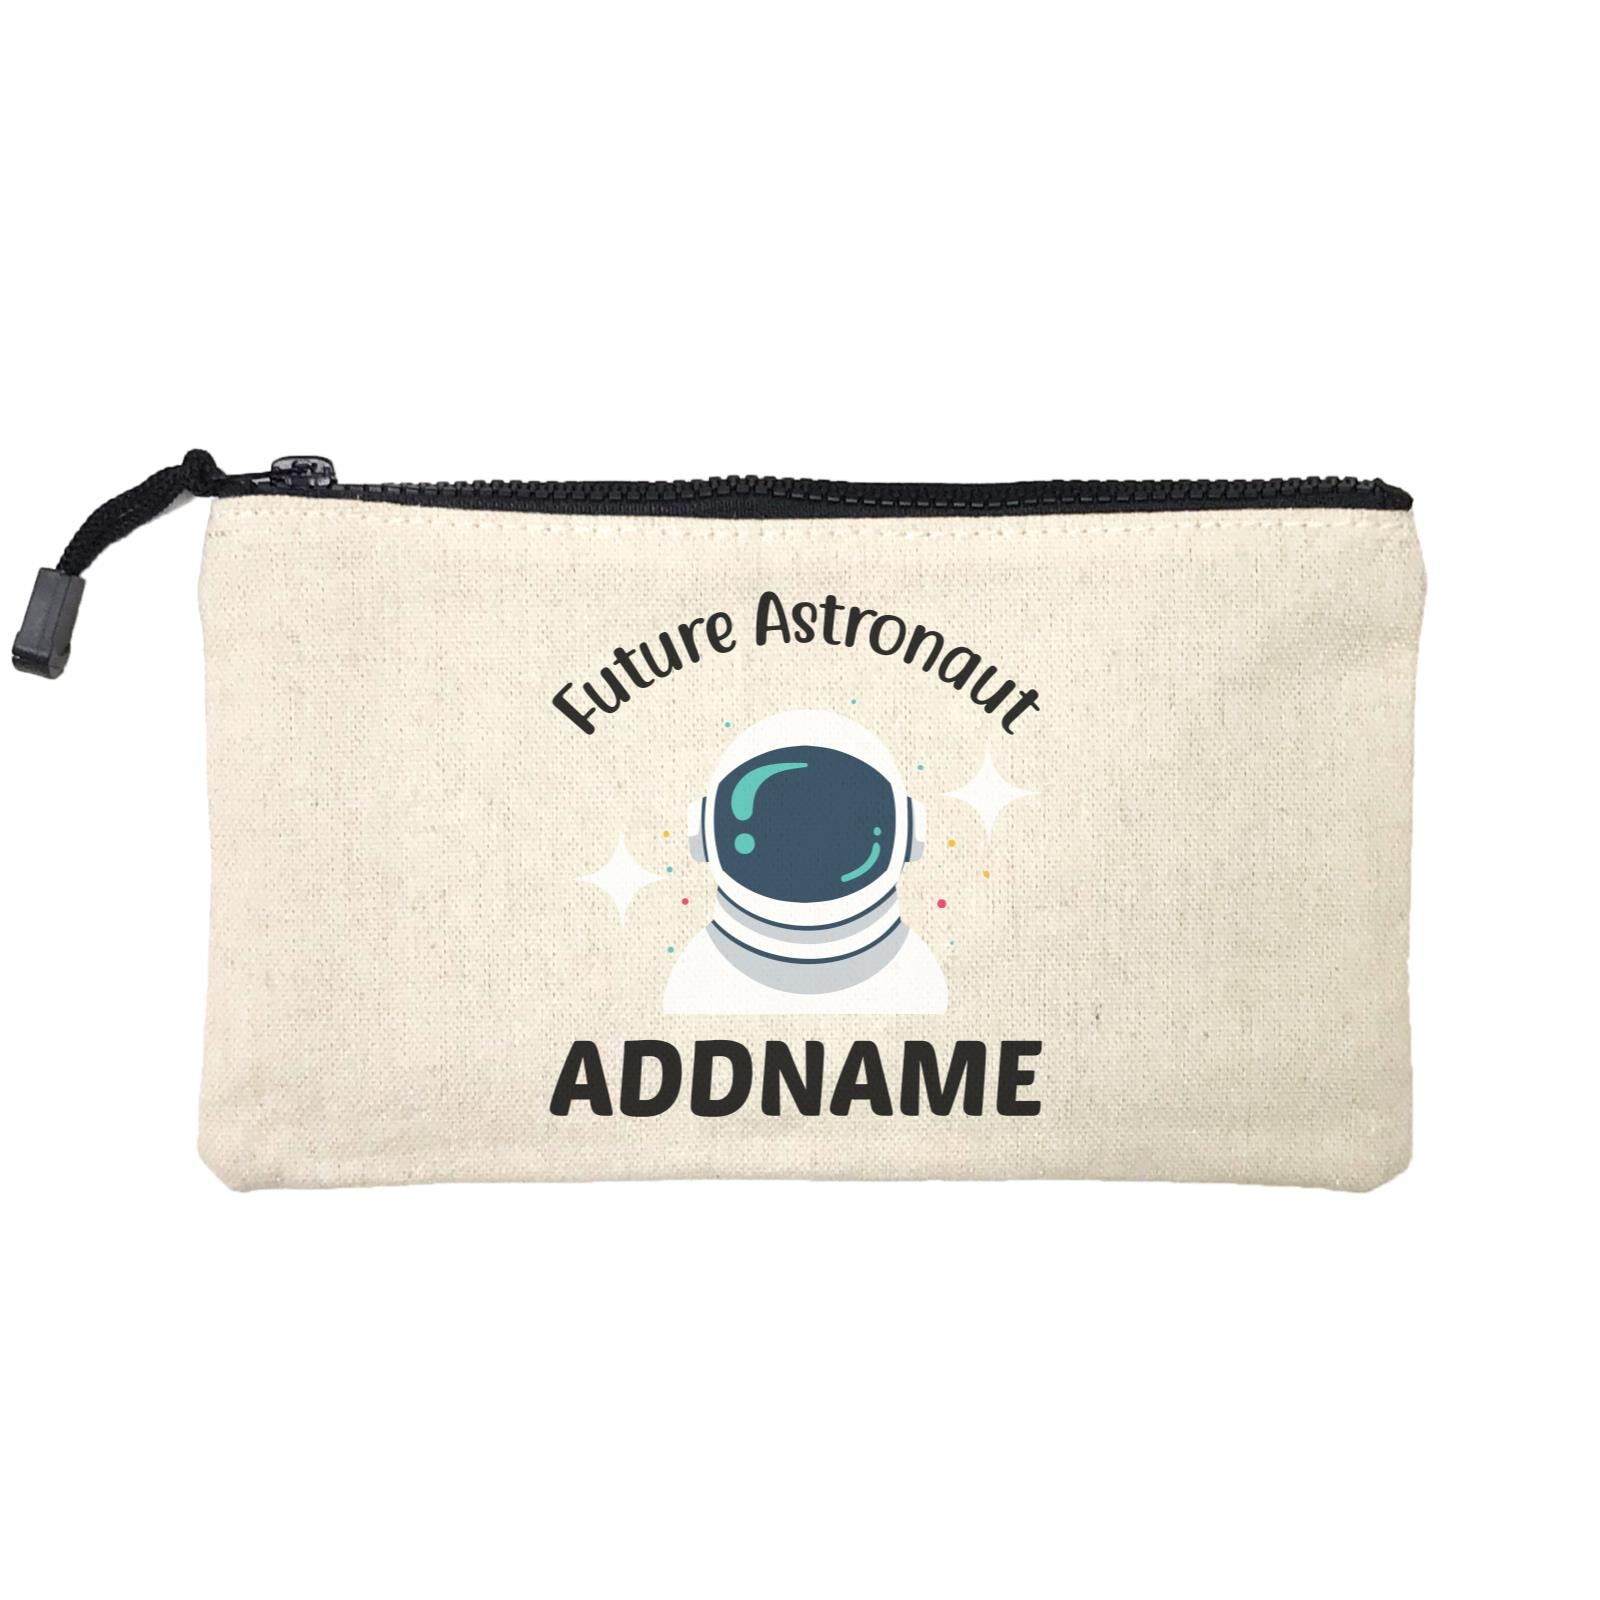 Future Astronaut Addname SP Stationery Pouch